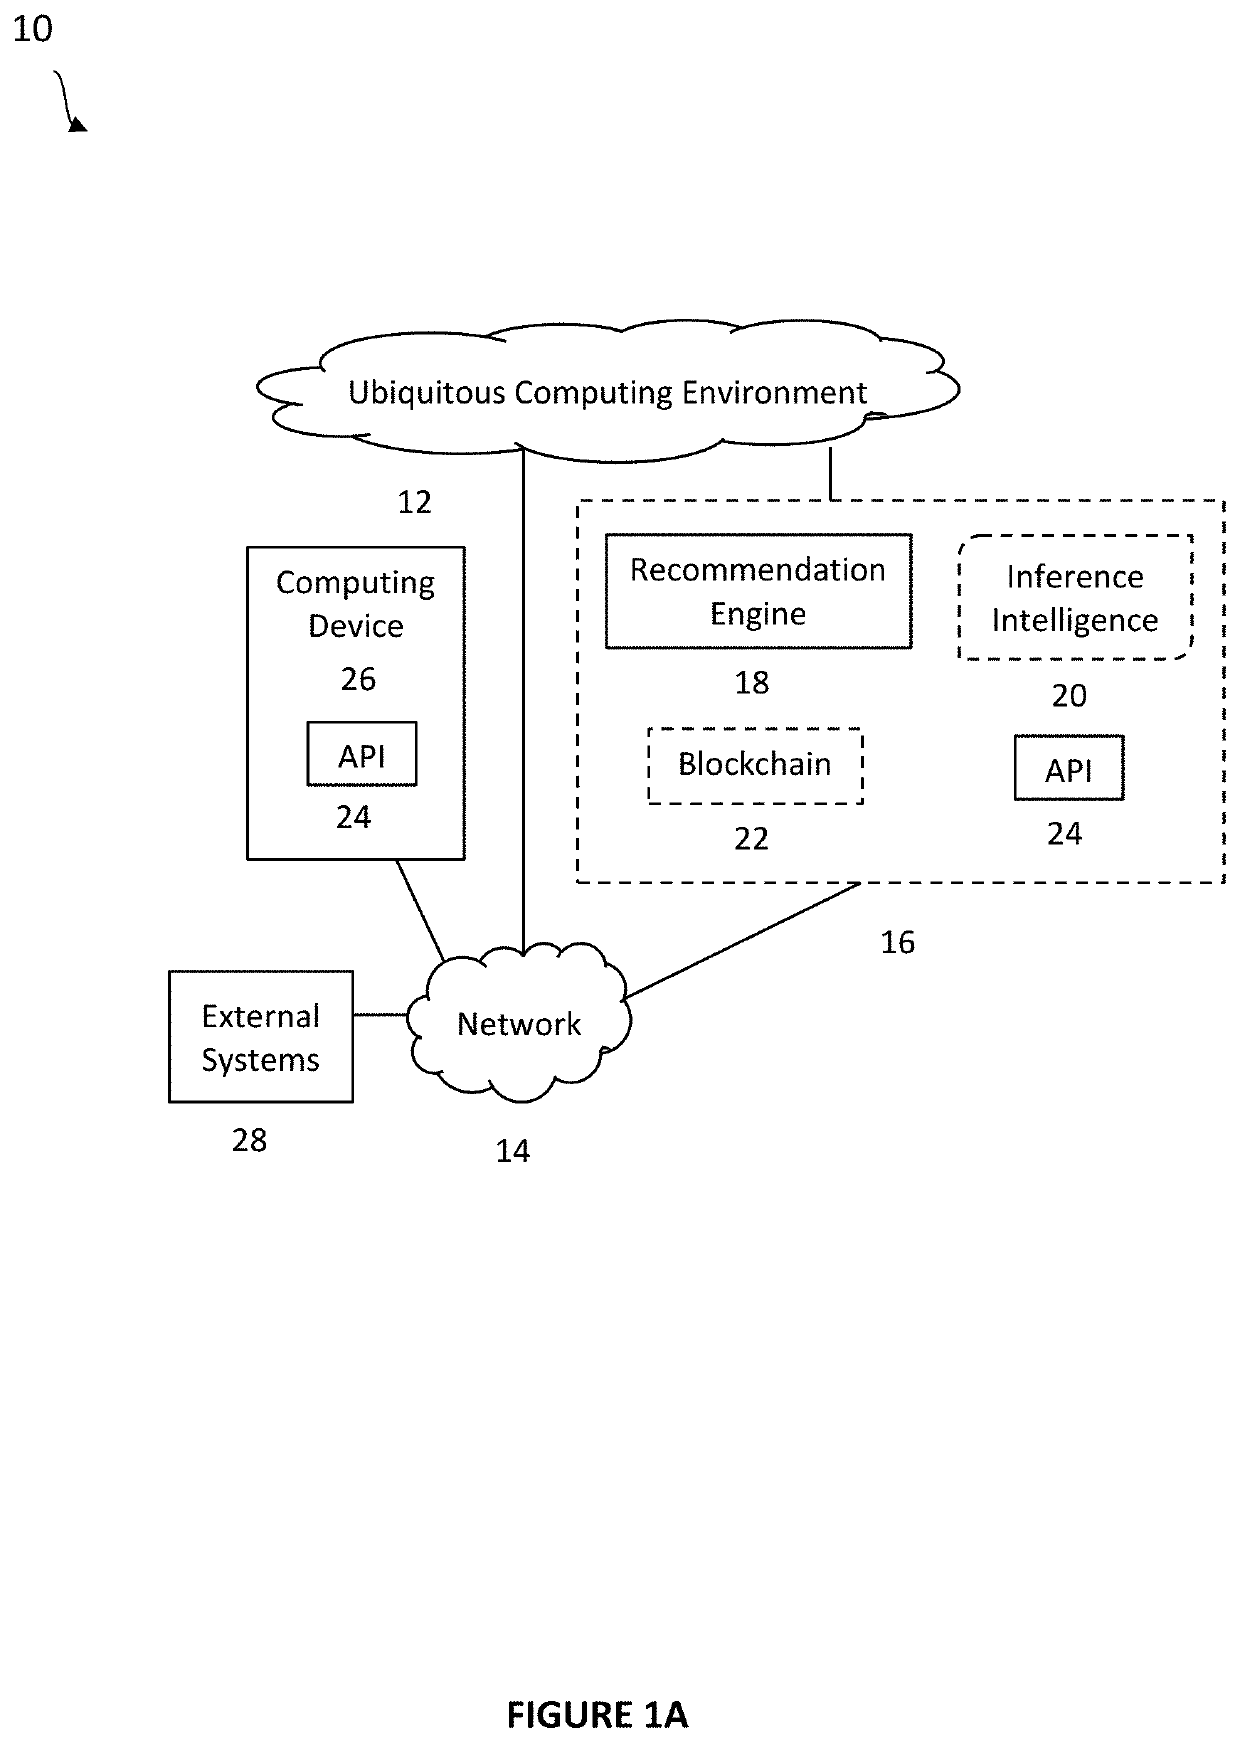 System and method for recommendations in ubiquituous computing environments